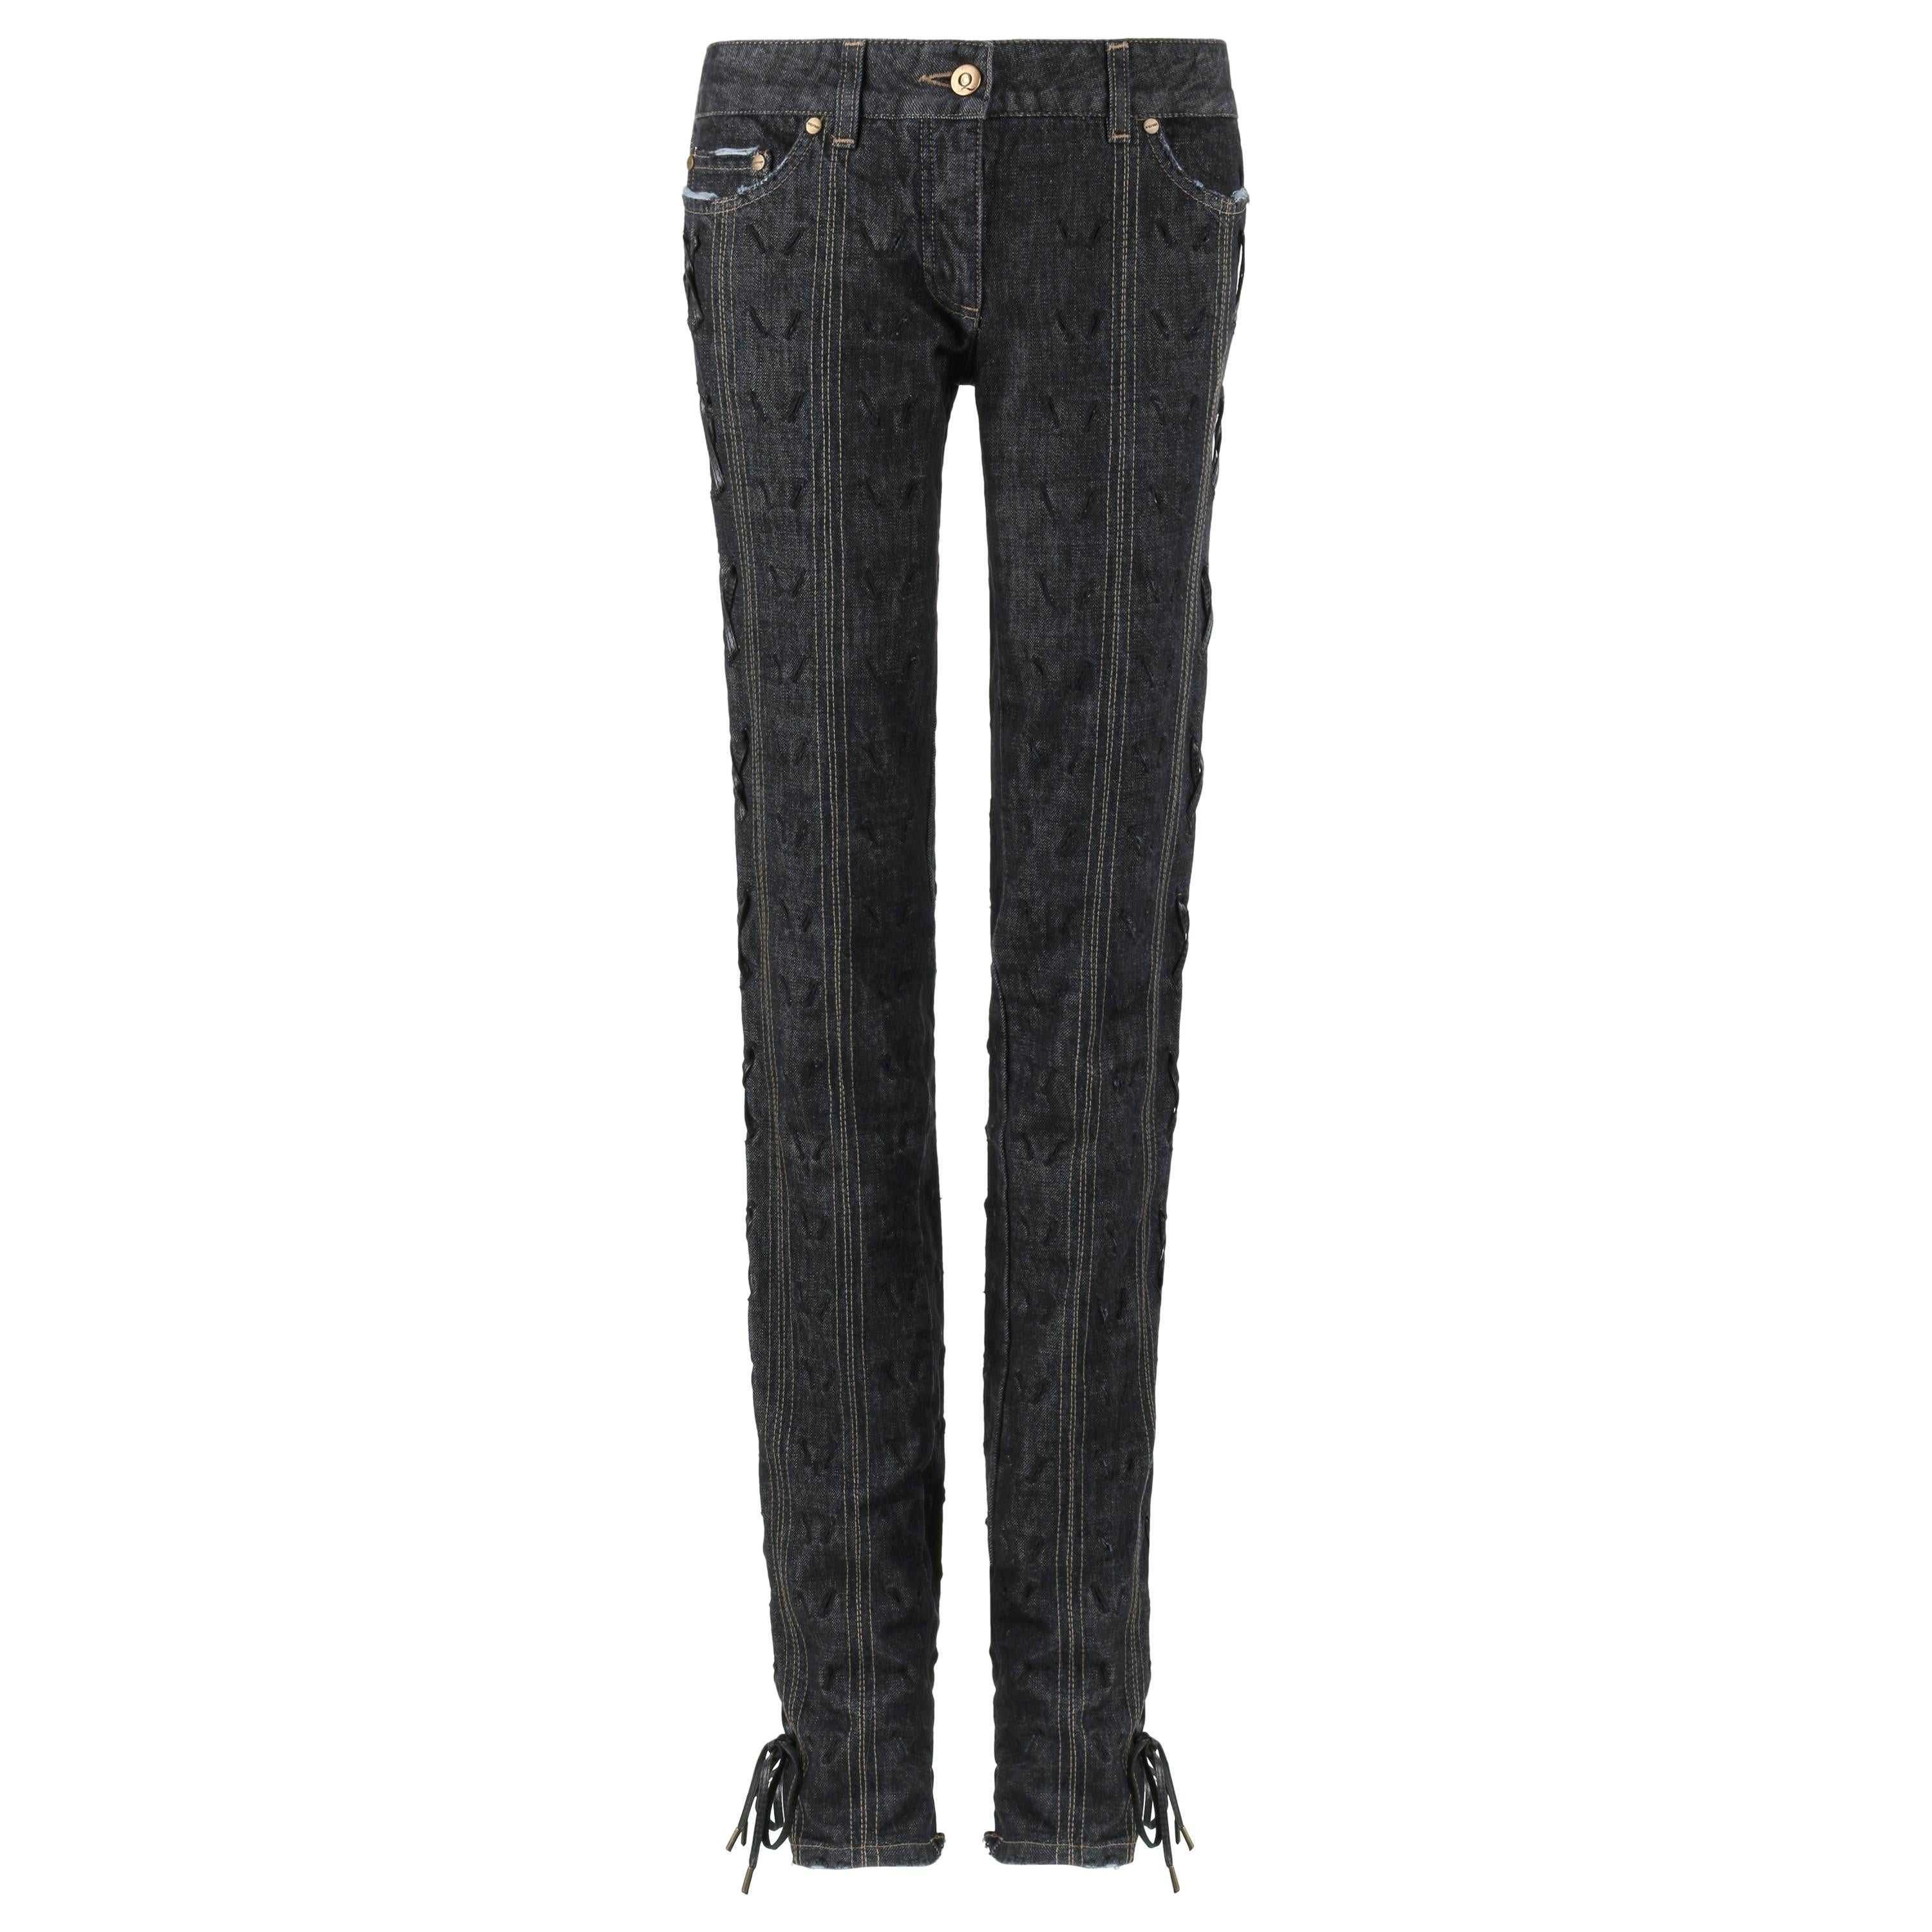 ALEXANDER McQUEEN A/W 2002 "Supercalifragilistic" Denim Lace Up Skinny Jeans